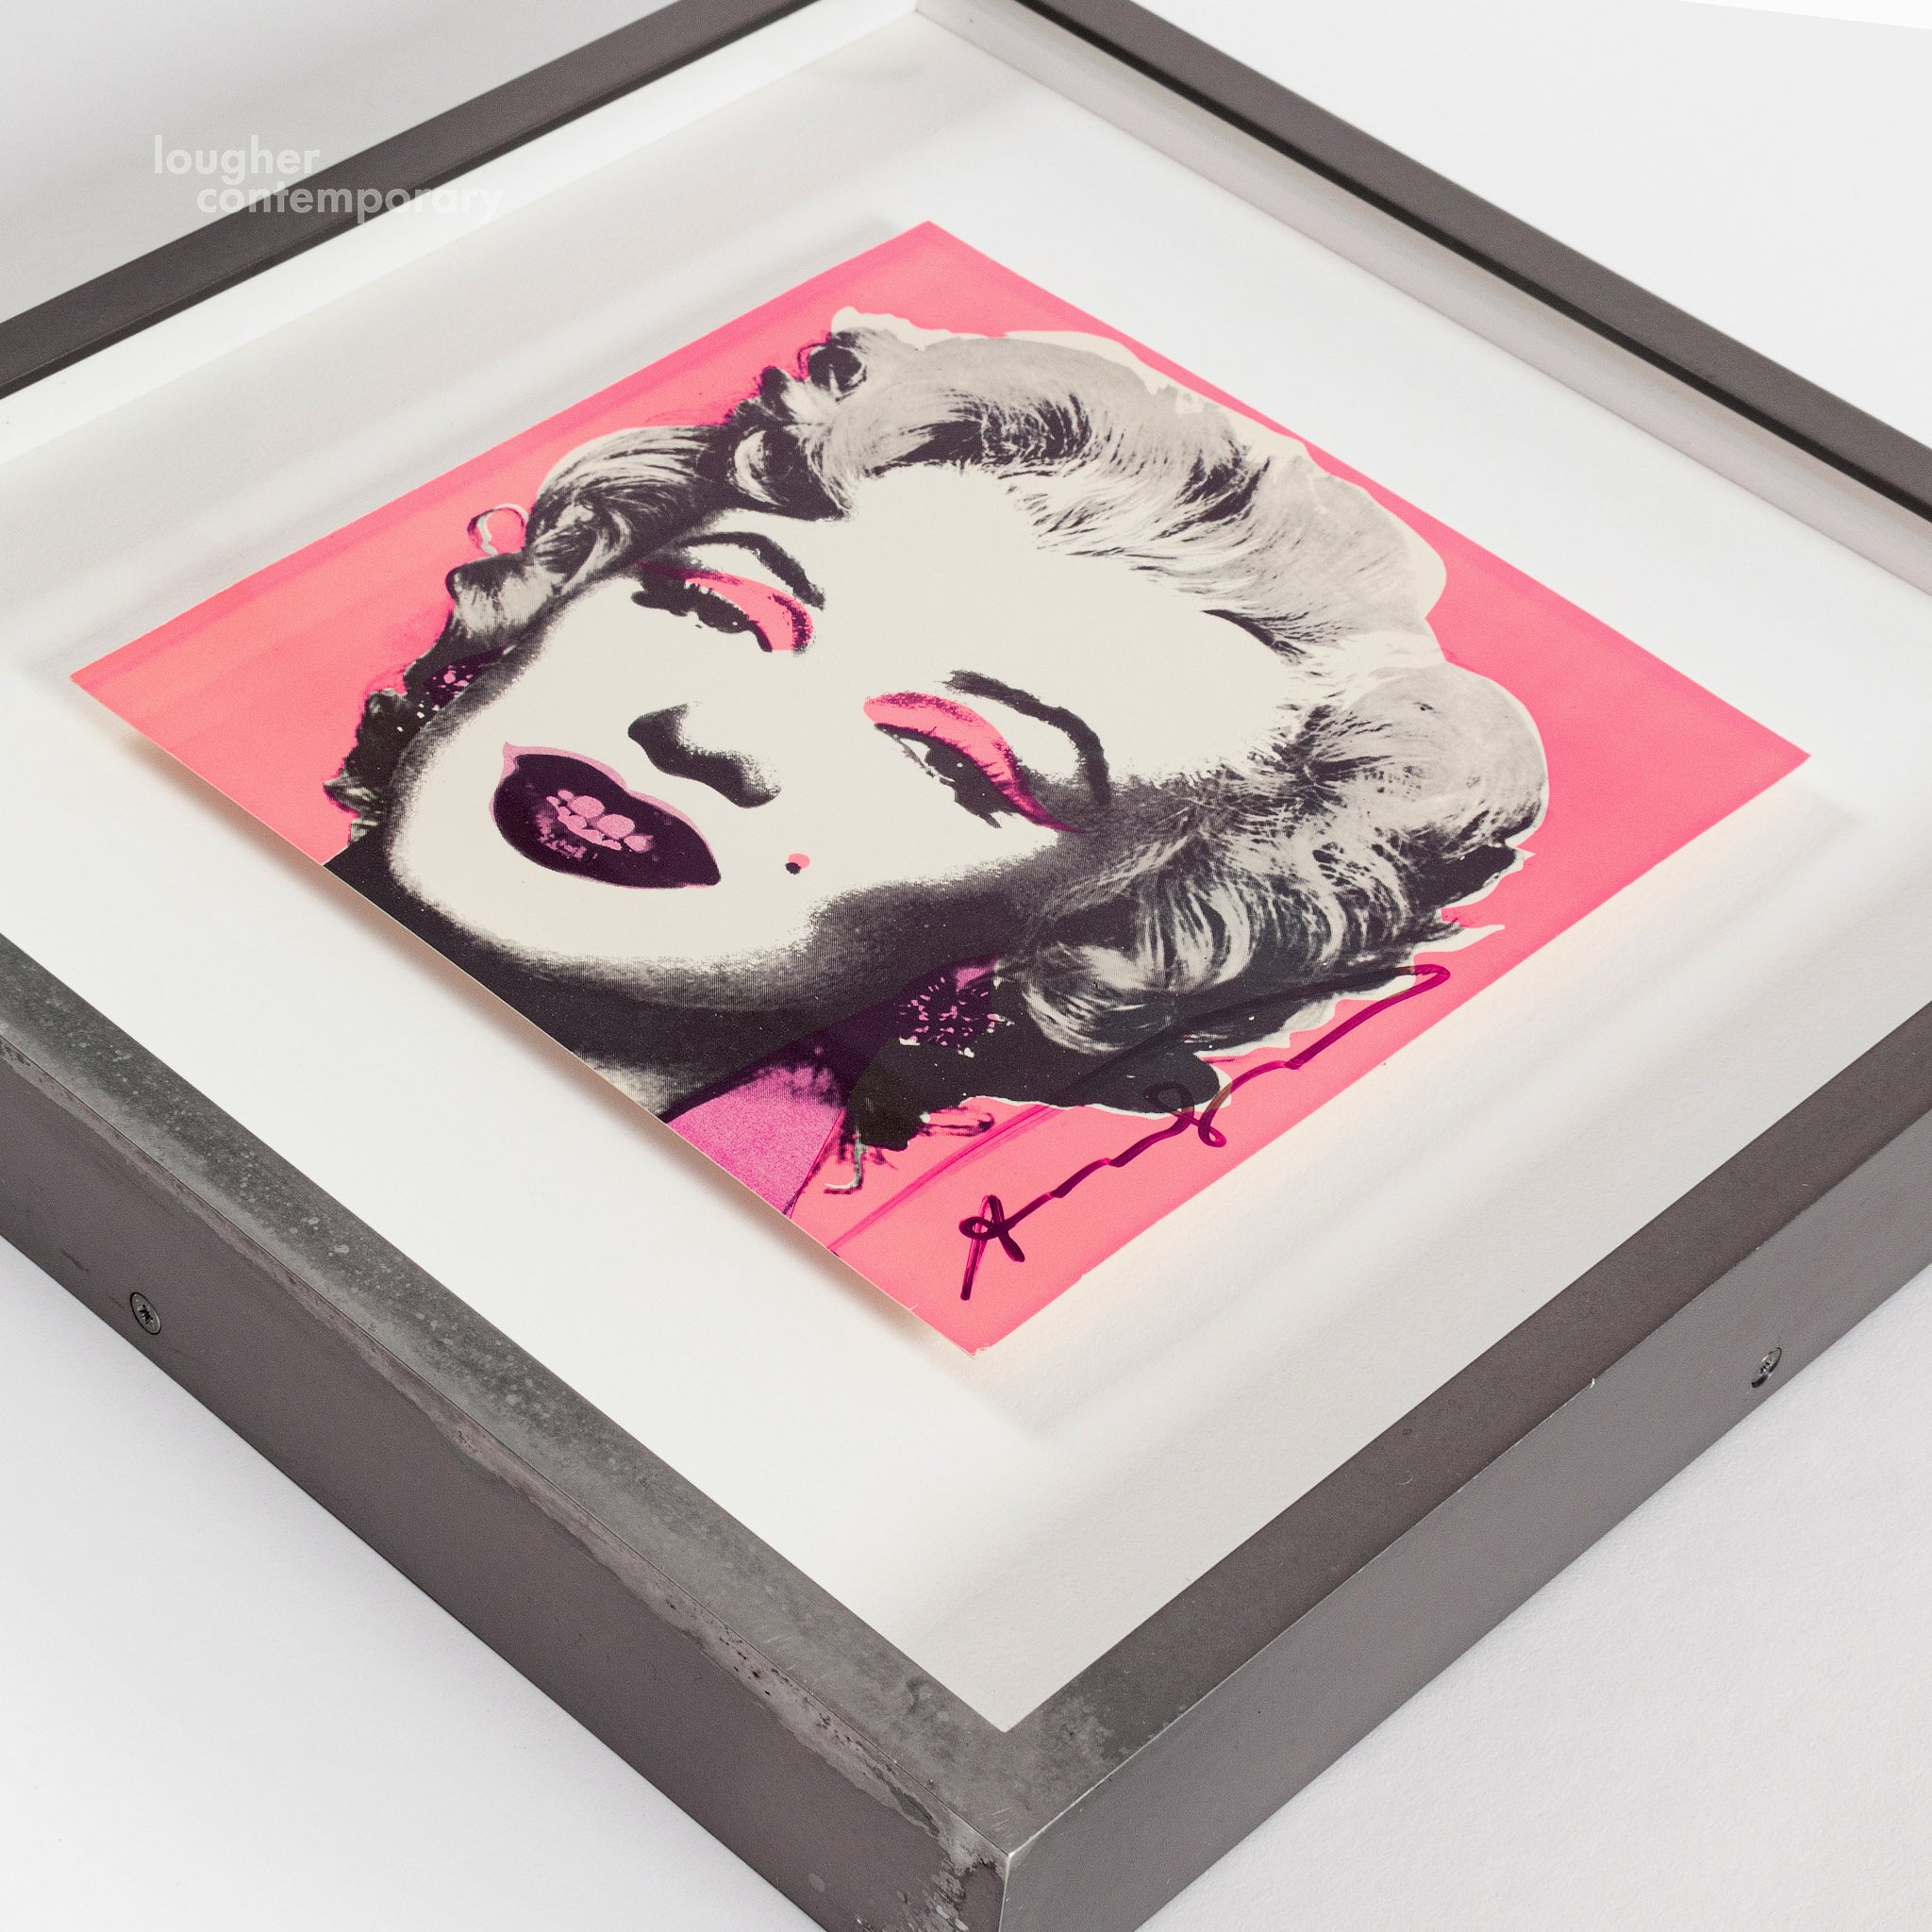 Andy Warhol, Marilyn Invitation (Castelli Graphics), 1981 For Sale - Lougher Contemporary